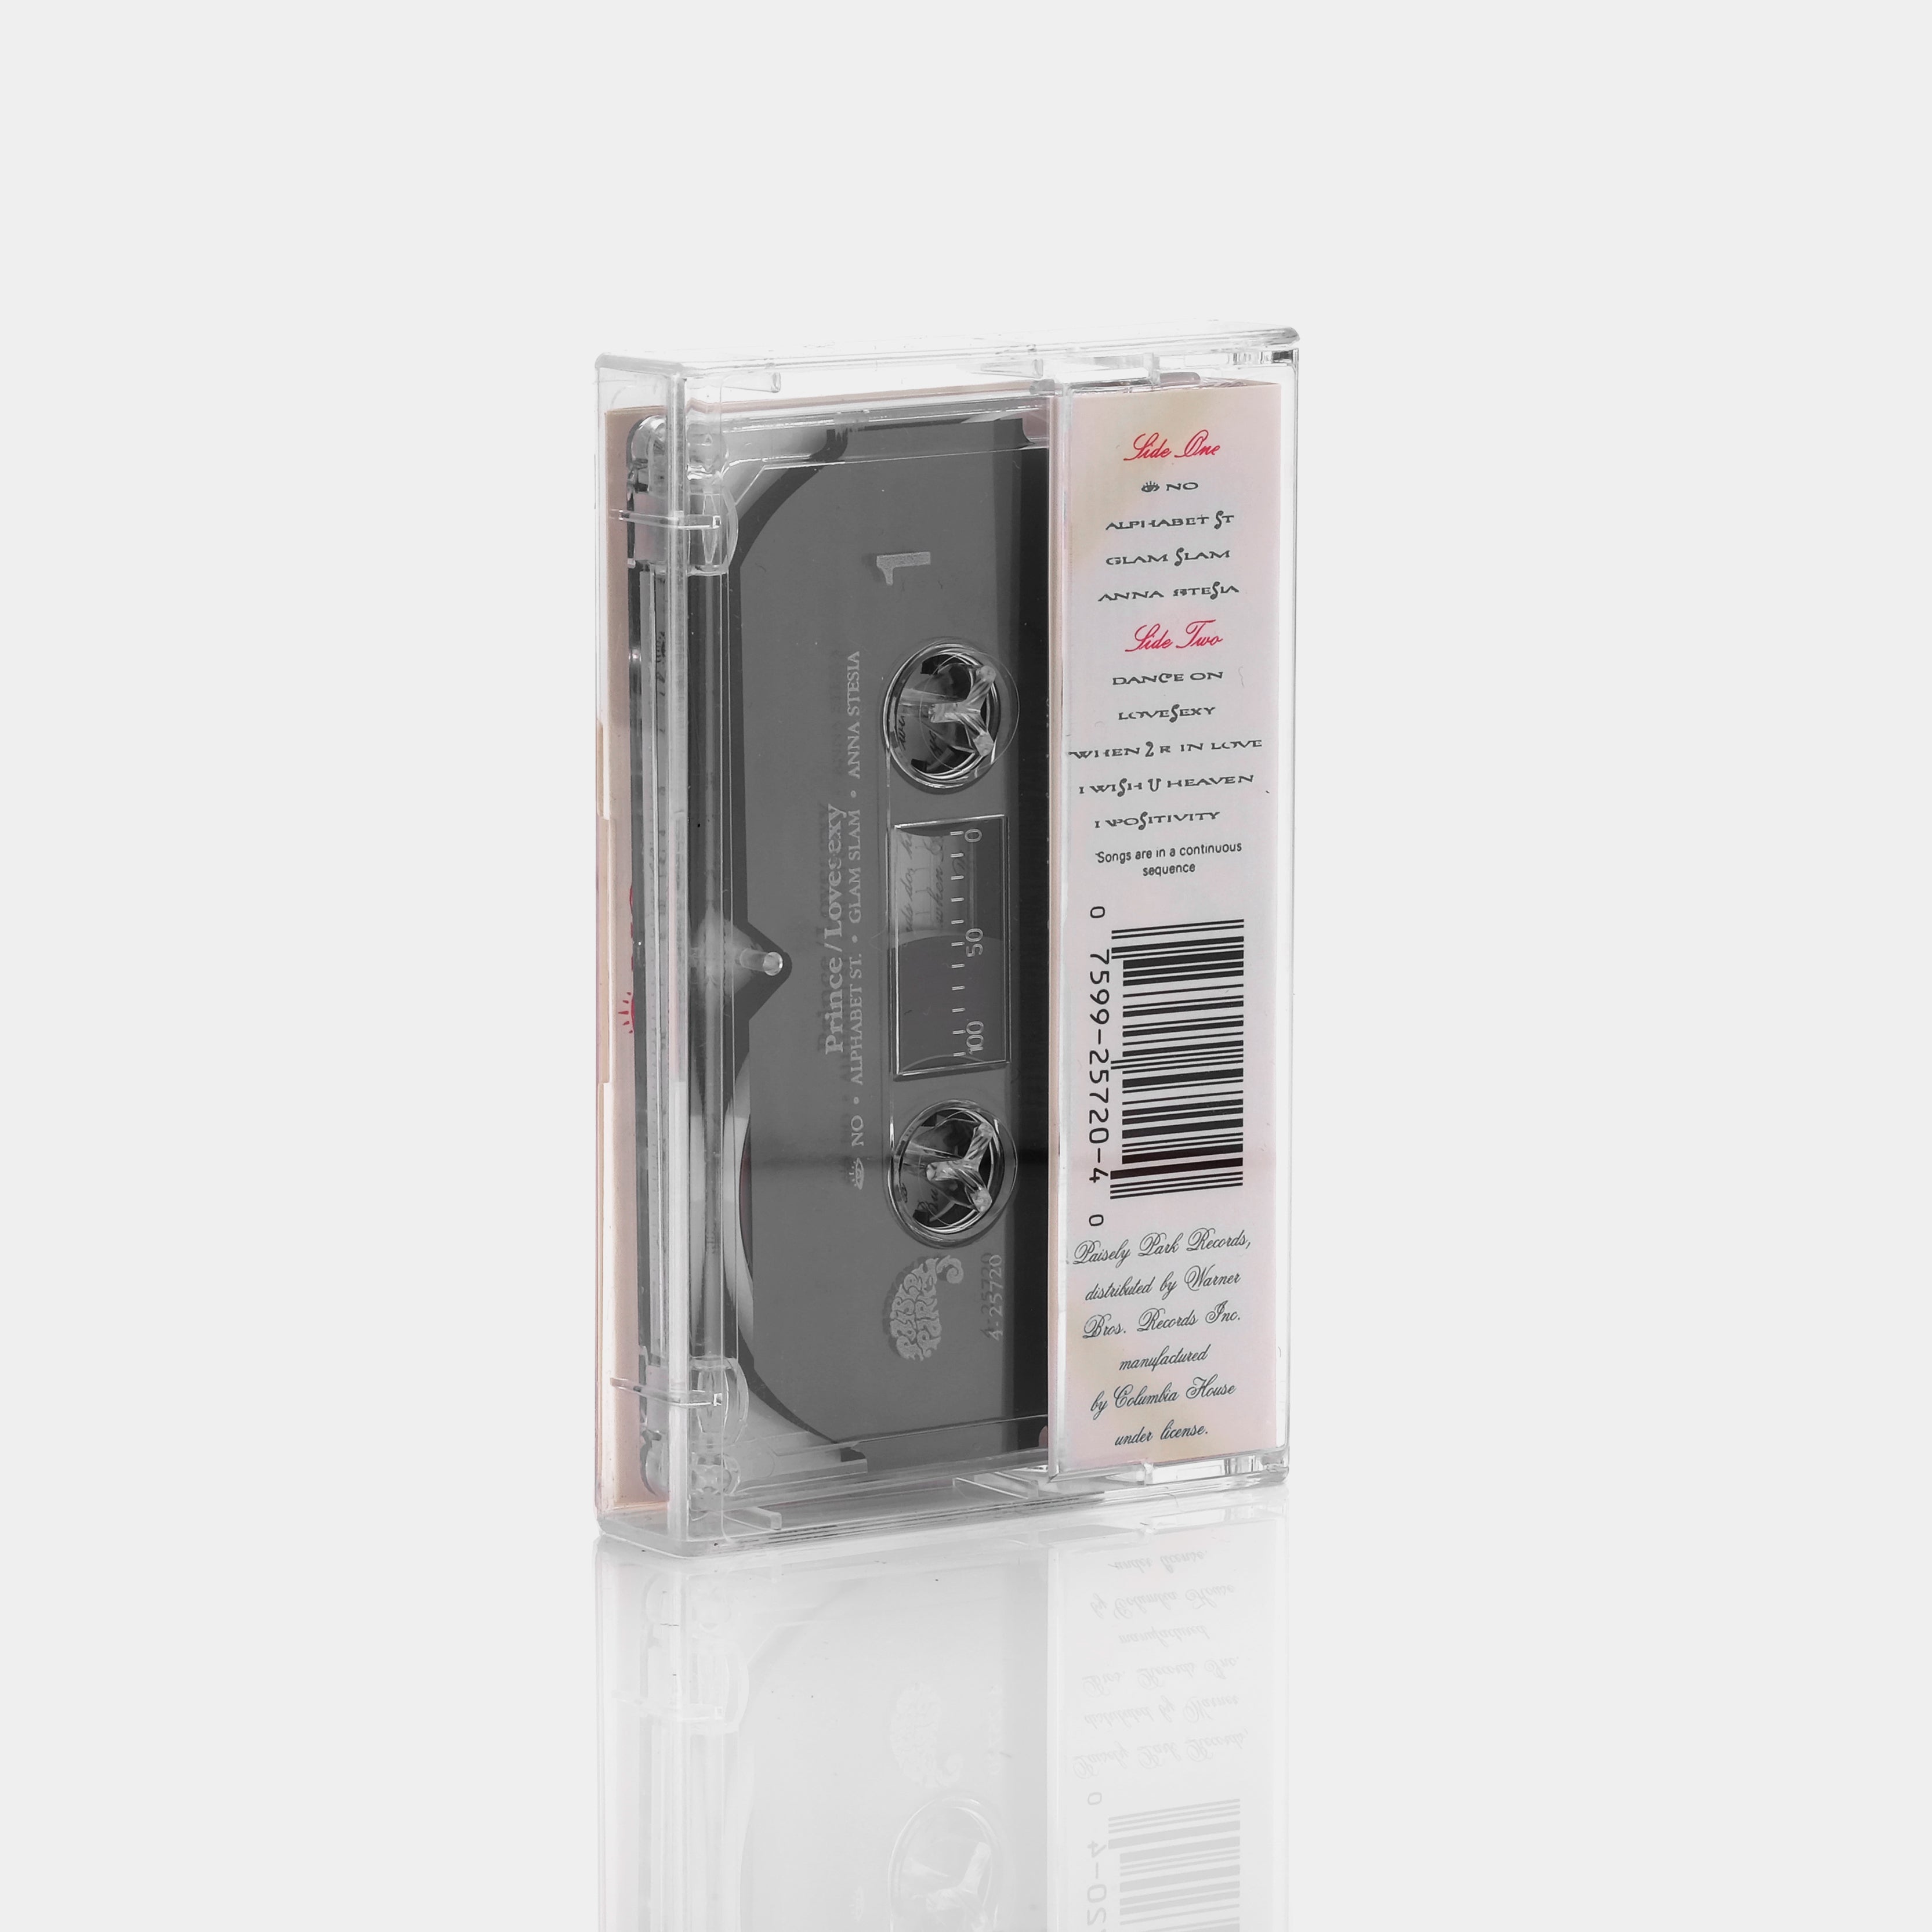 Prince - Lovesexy Cassette Tape